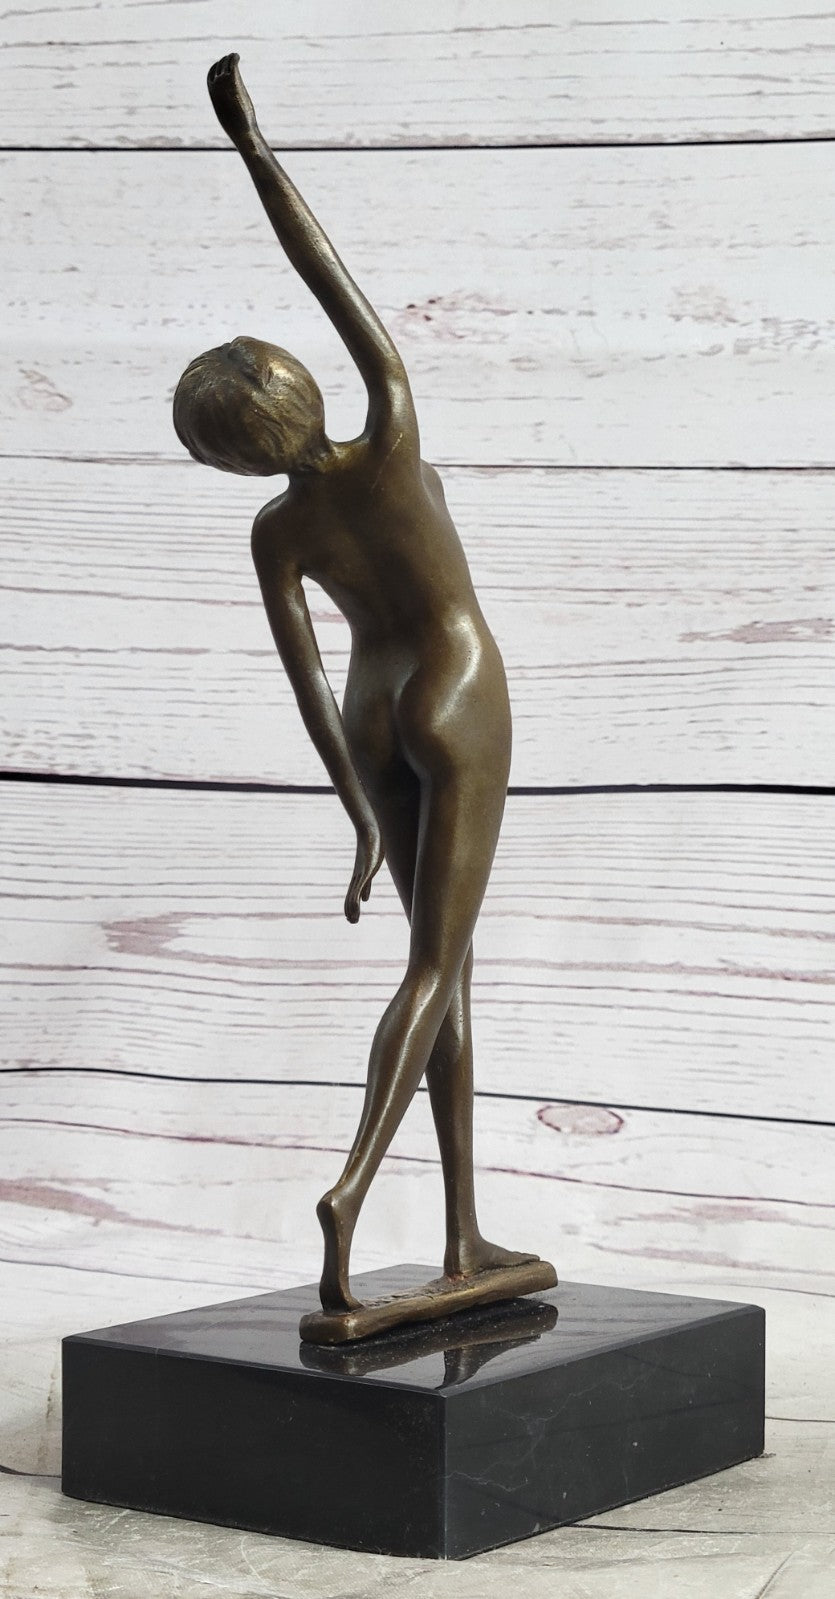 Handcrafted bronze sculpture SALE Marble Marble Posing Dancer Fall Free Nude Art